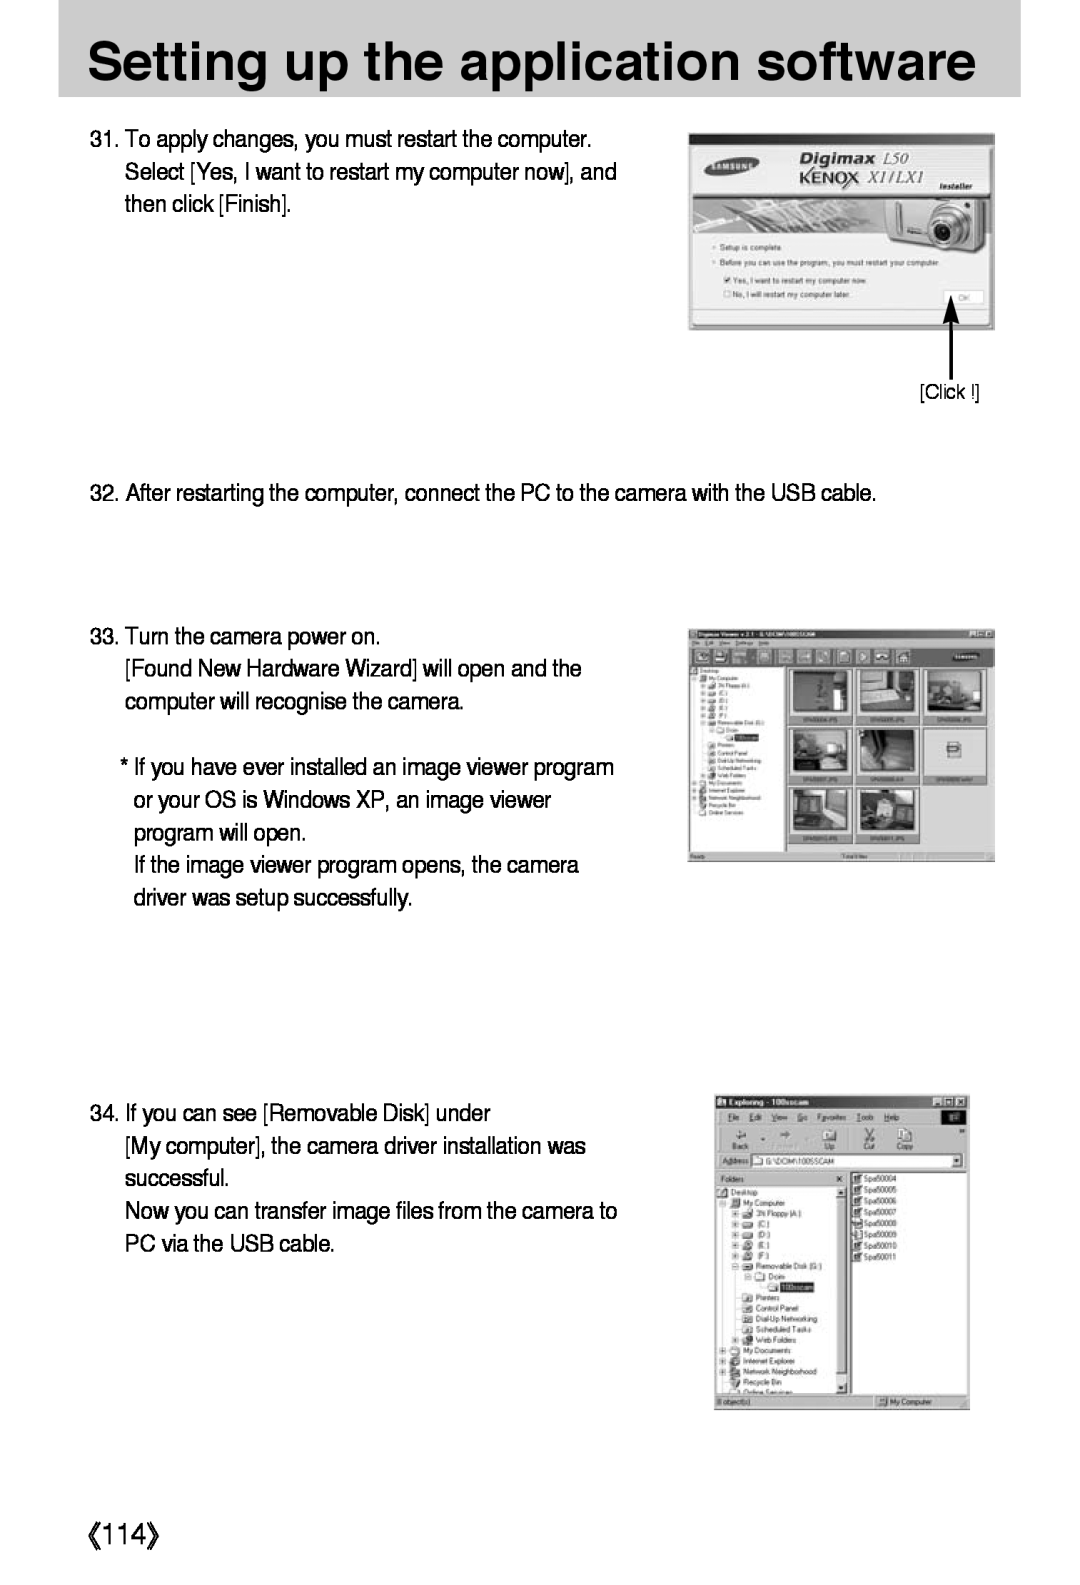 Samsung L50 user manual 《114》, Setting up the application software 